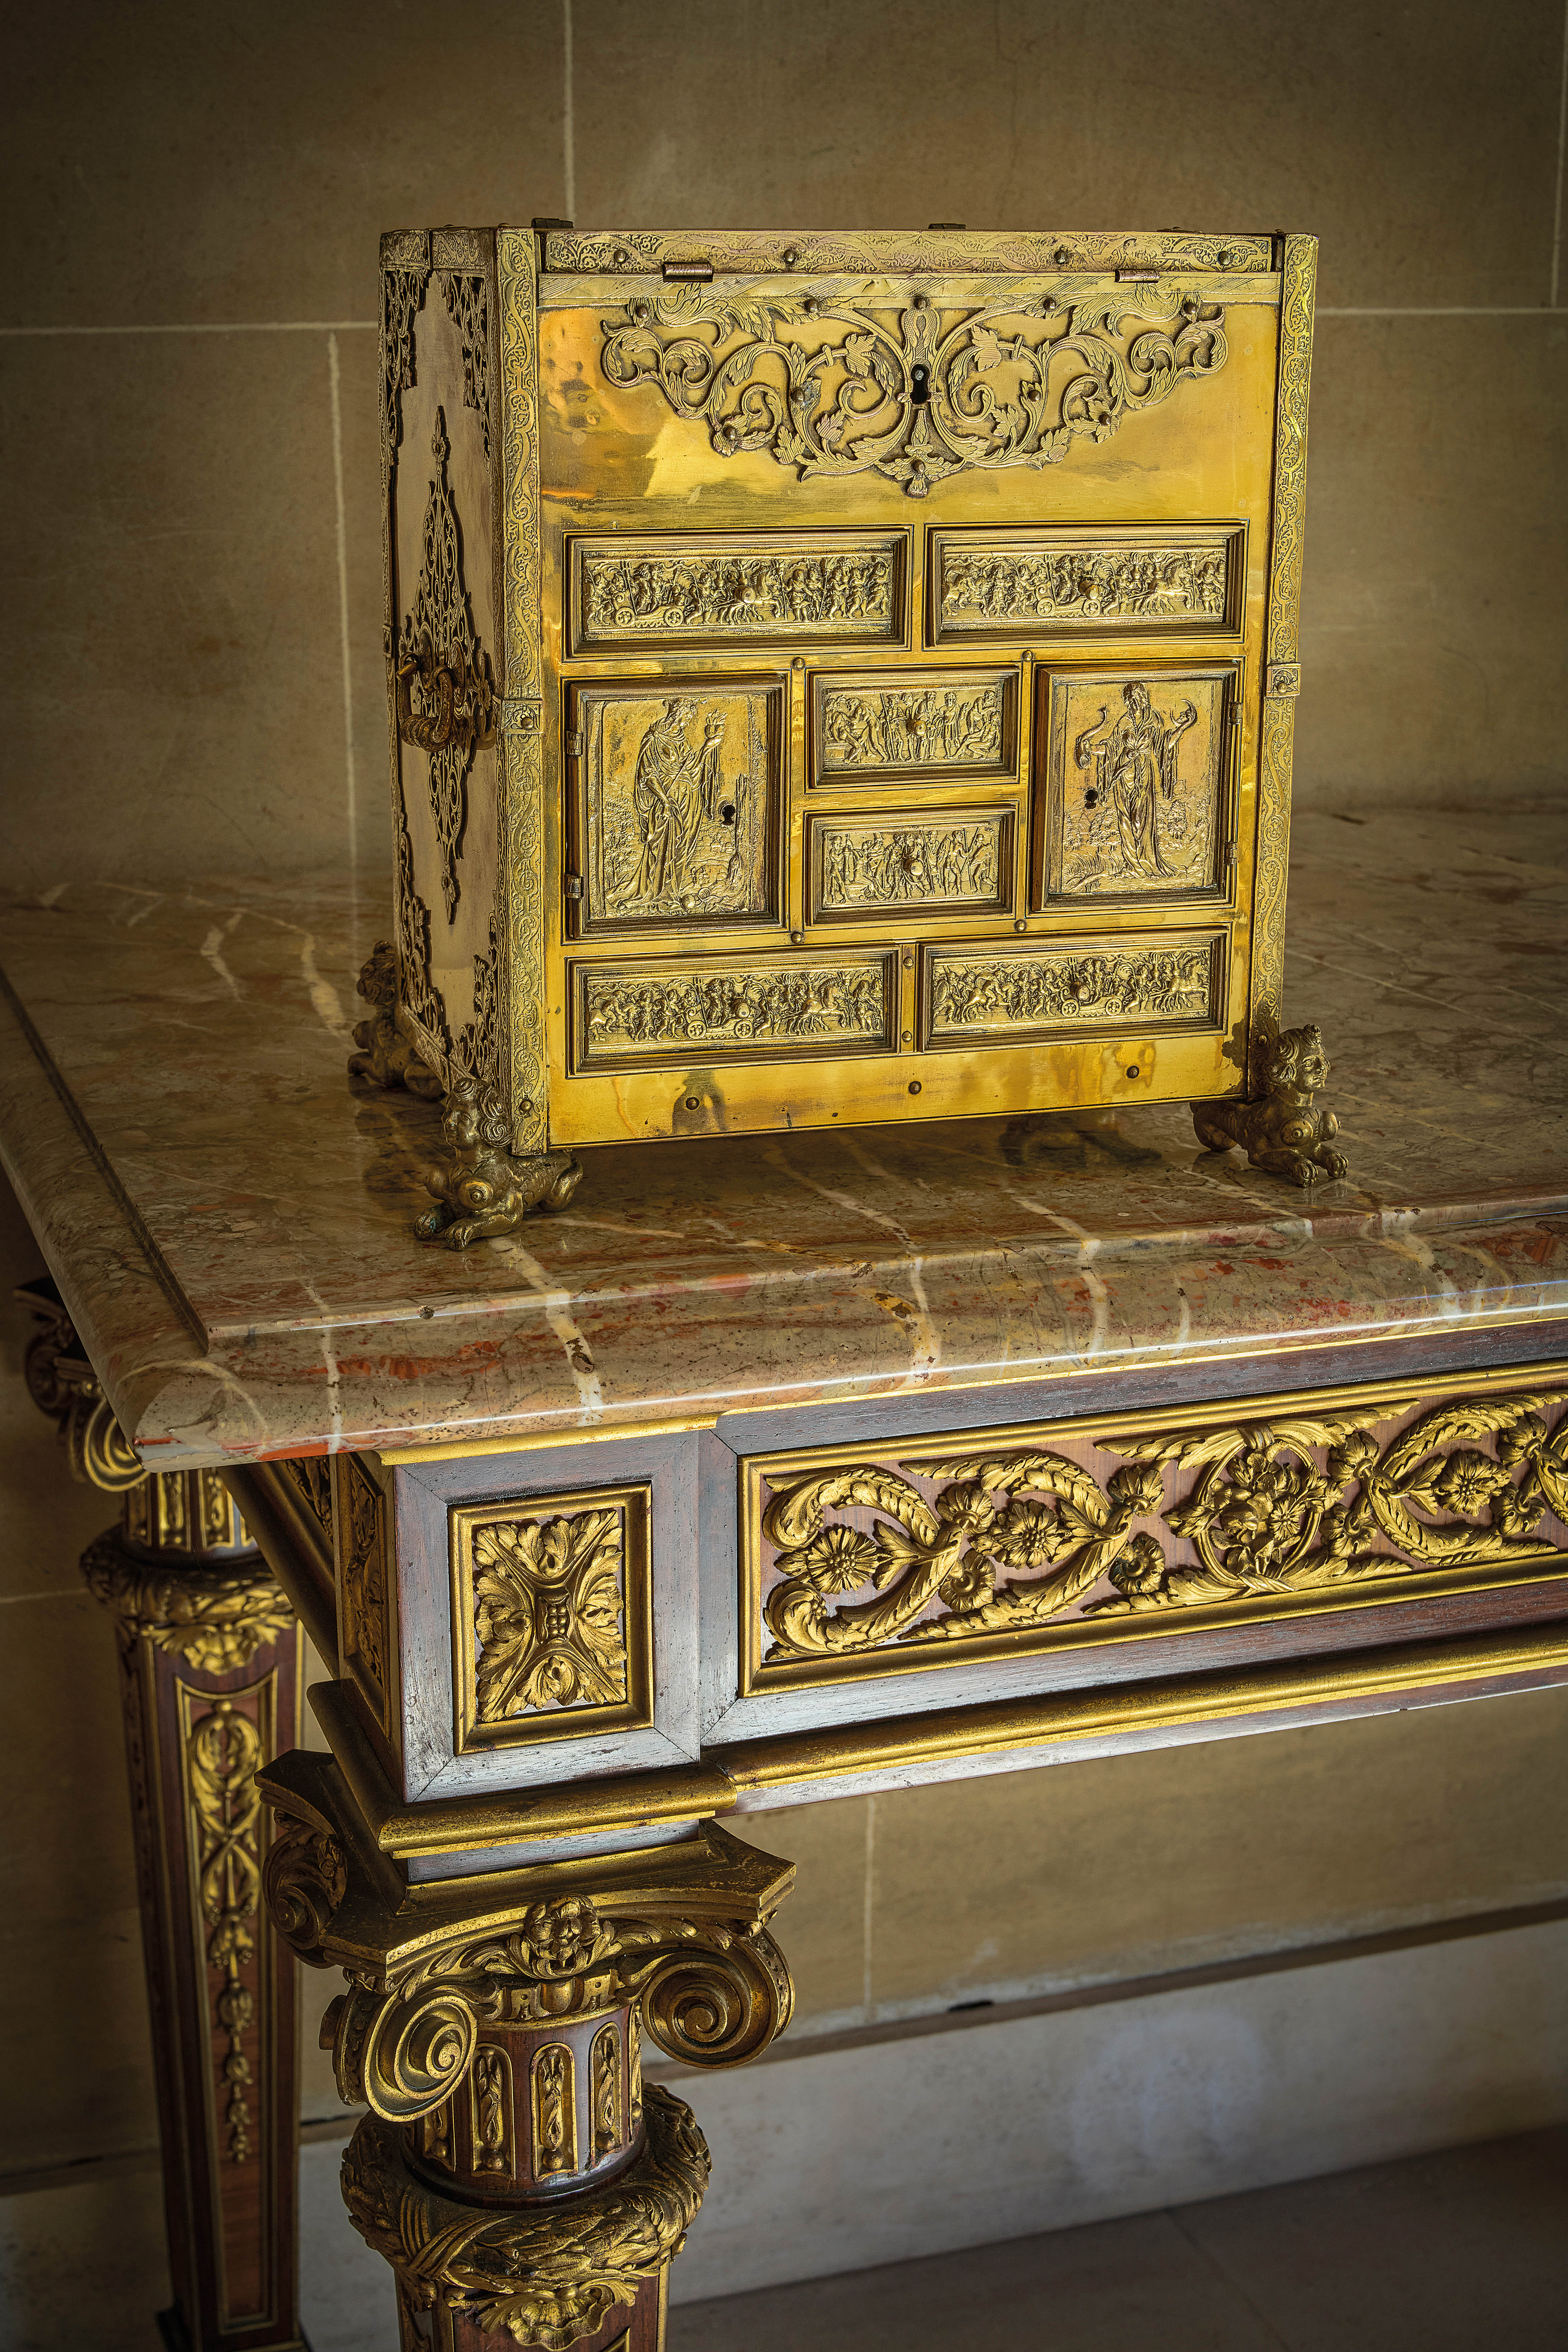 A SOUTH GERMAN GILT COPPER TABLE CABINET PROBABLY AUGSBURG, LATE 16TH CENTURY with engraved and